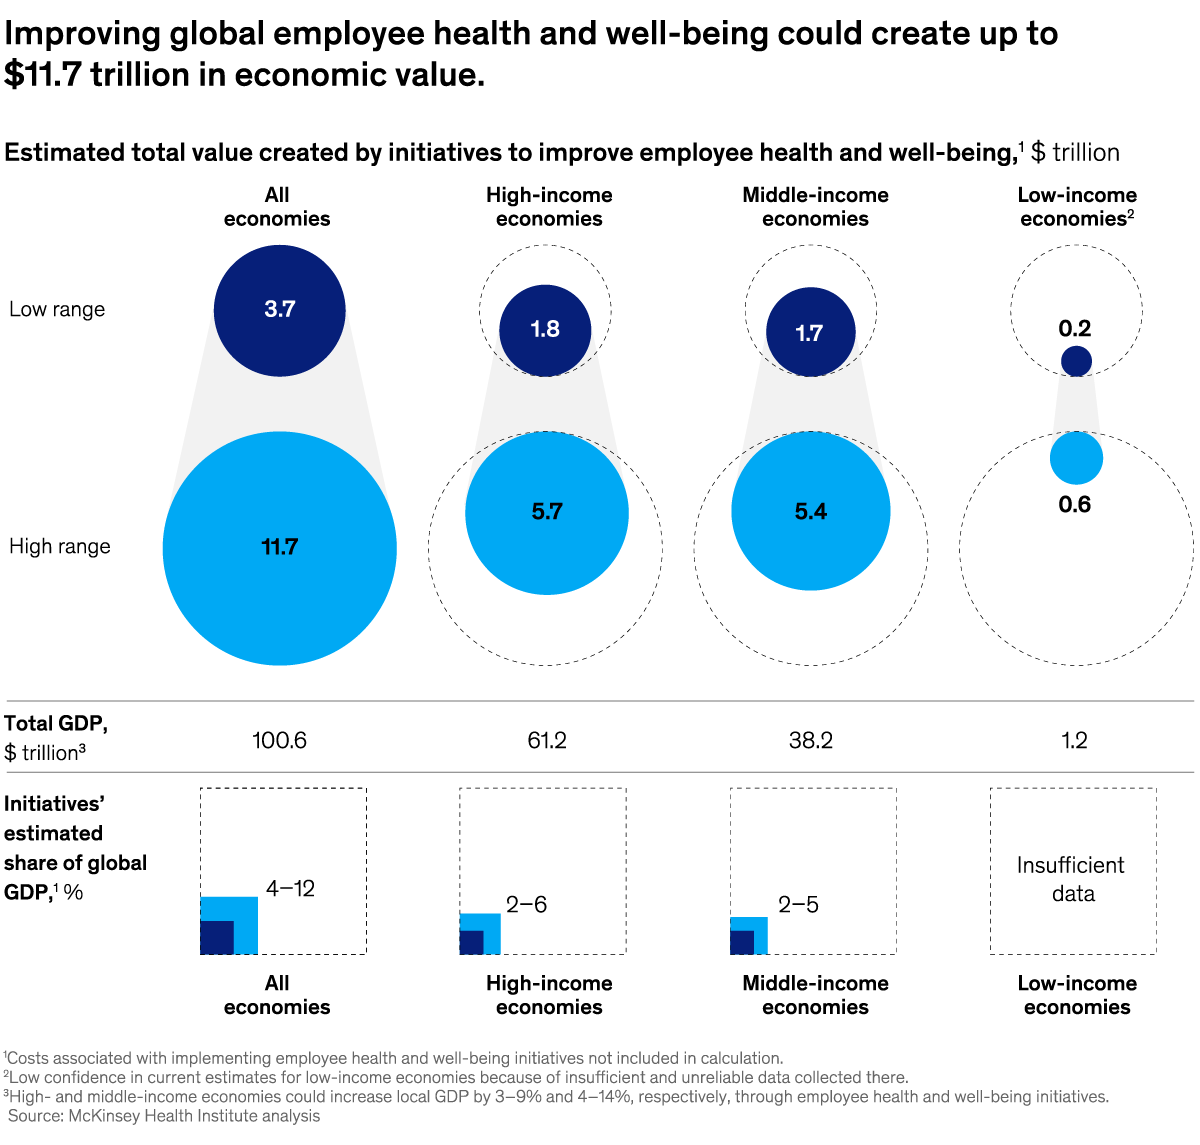 A chart titled “Improving global employee health and well-being could create up to $11.7 trillion in economic value.” Click to open the full article on McKinsey.com.